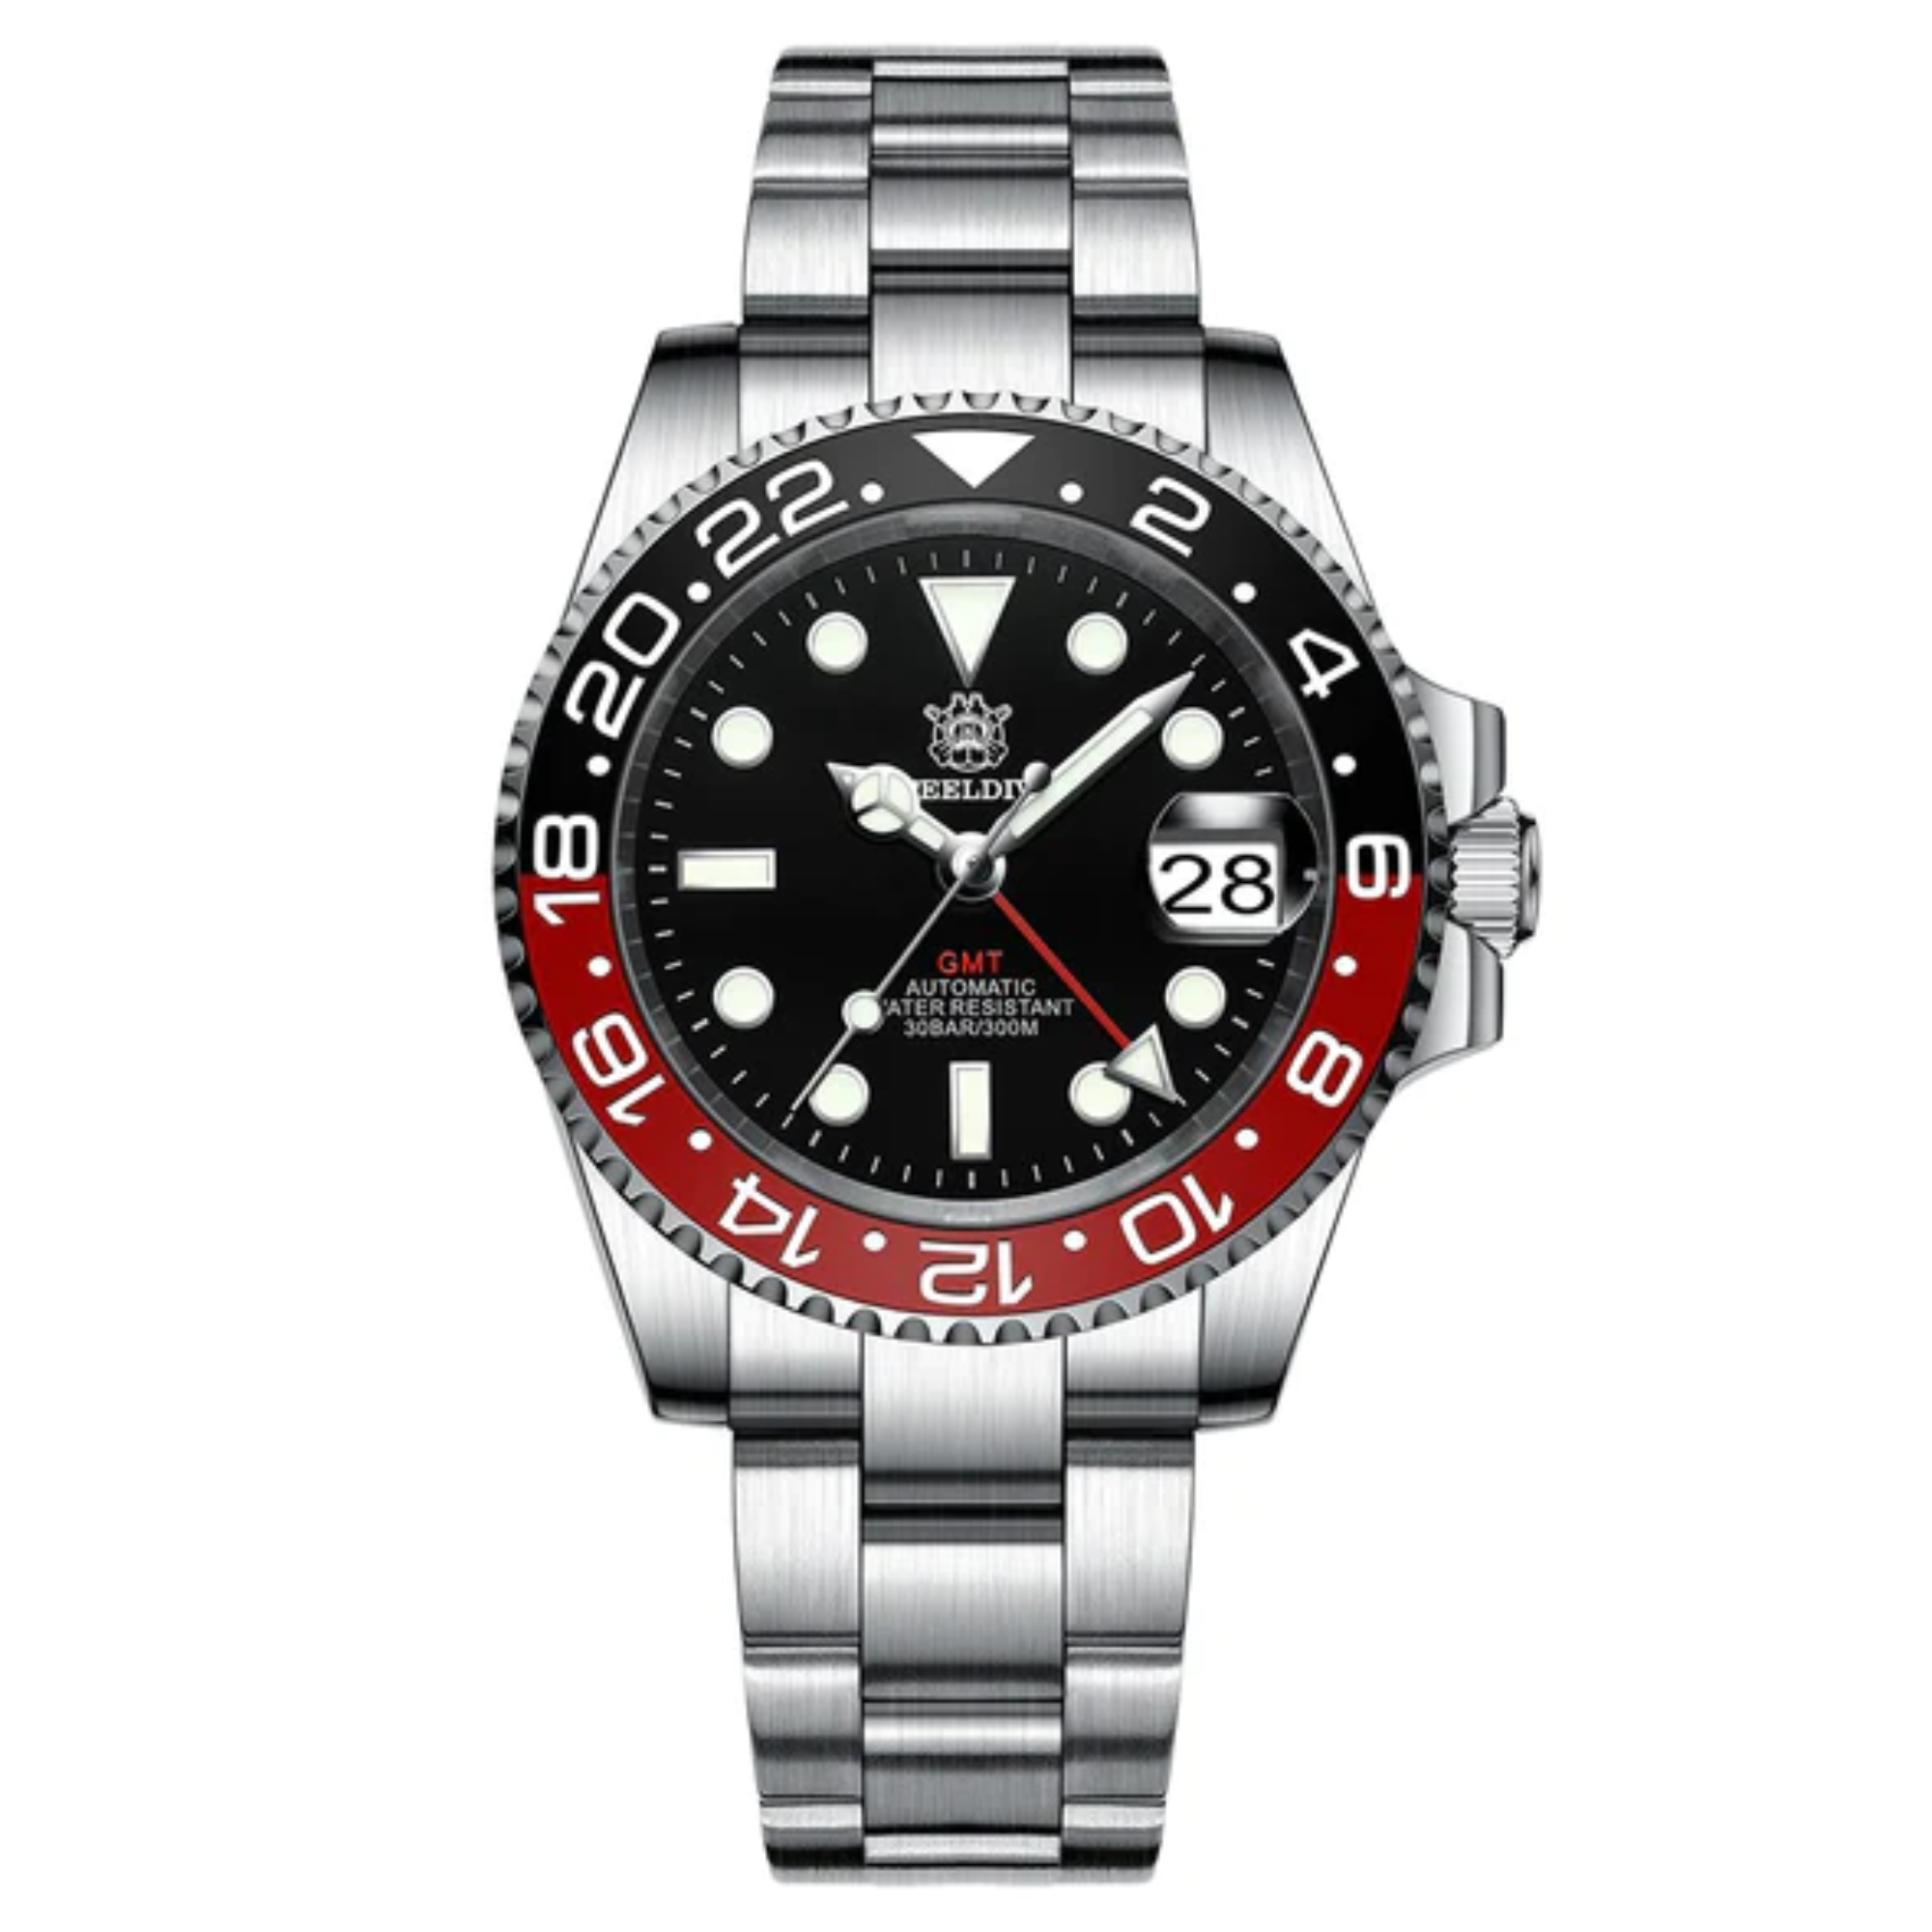 Steeldive SD1993 NH34 GMT Automatic Watch V2 Red/Black Dial With Oyster Bracelet